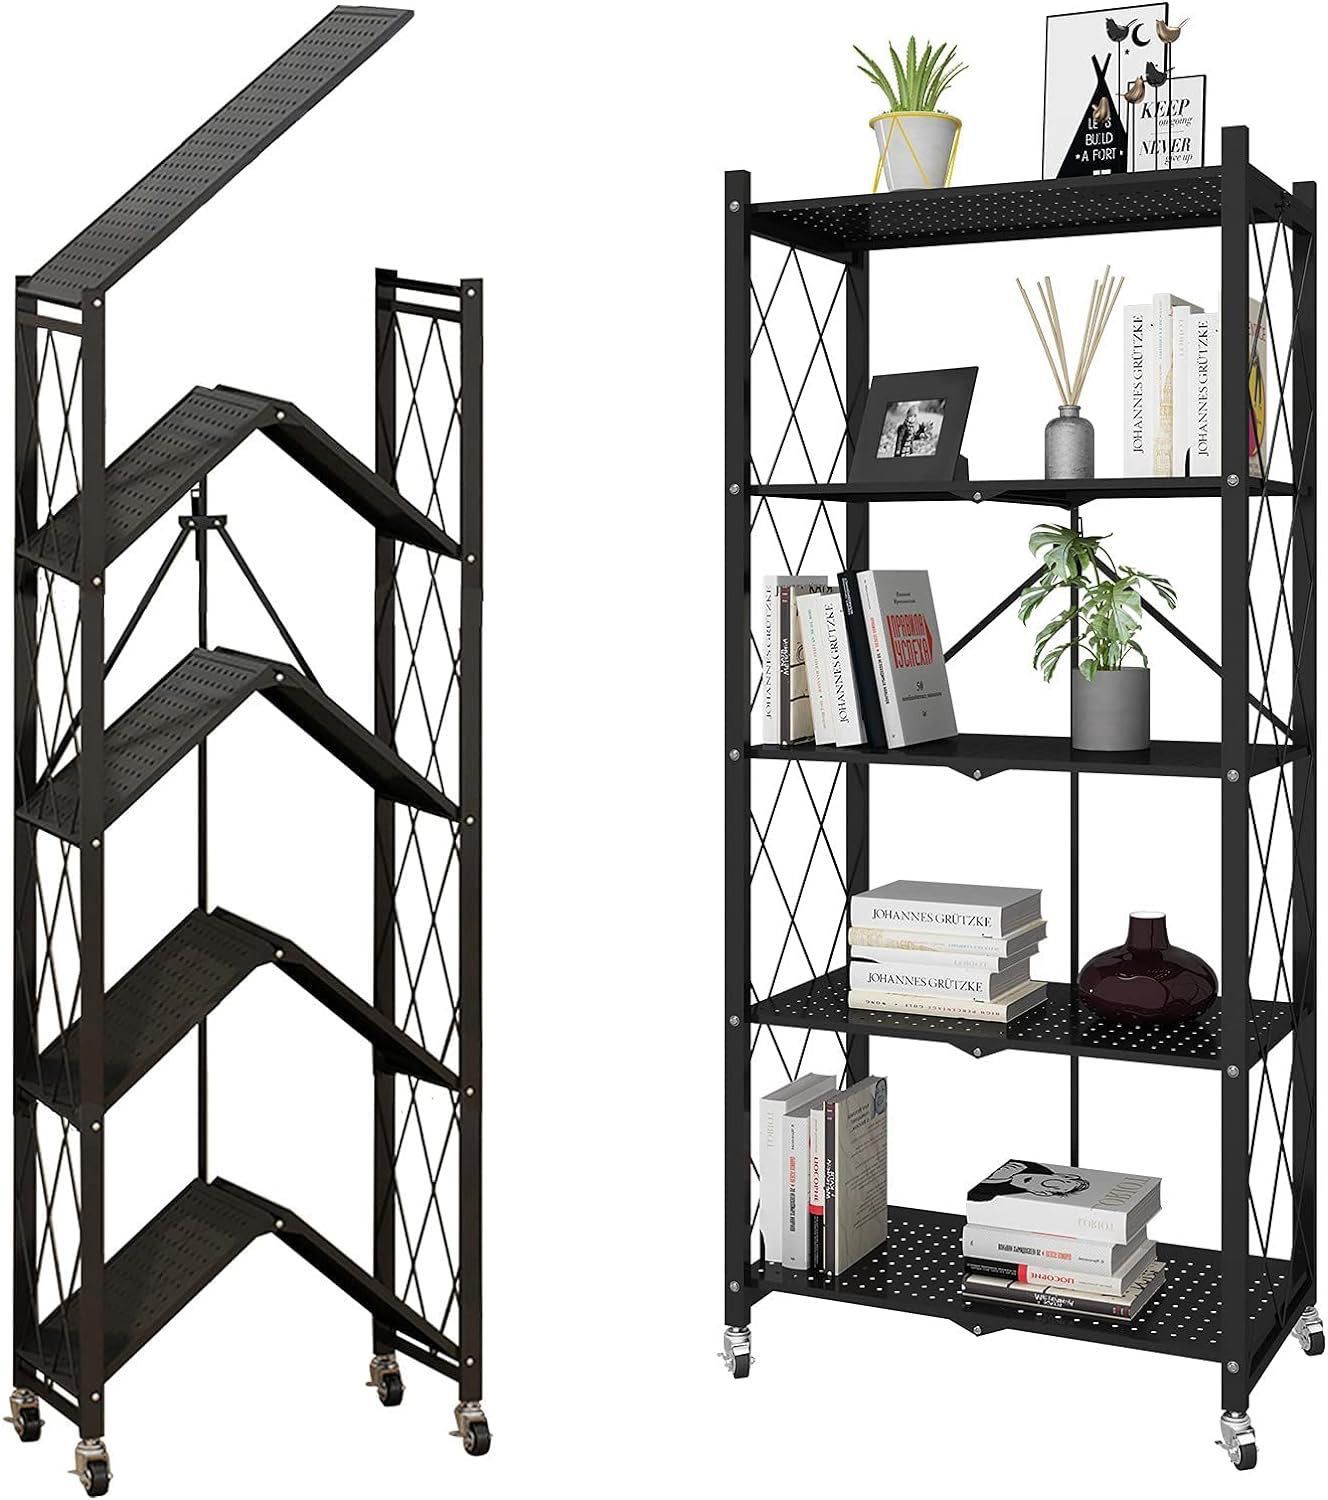 Metal Heavy Duty Storage Shelves with Wheels There are 3, 4, and 5 layers (white and black)$35、$45、$55